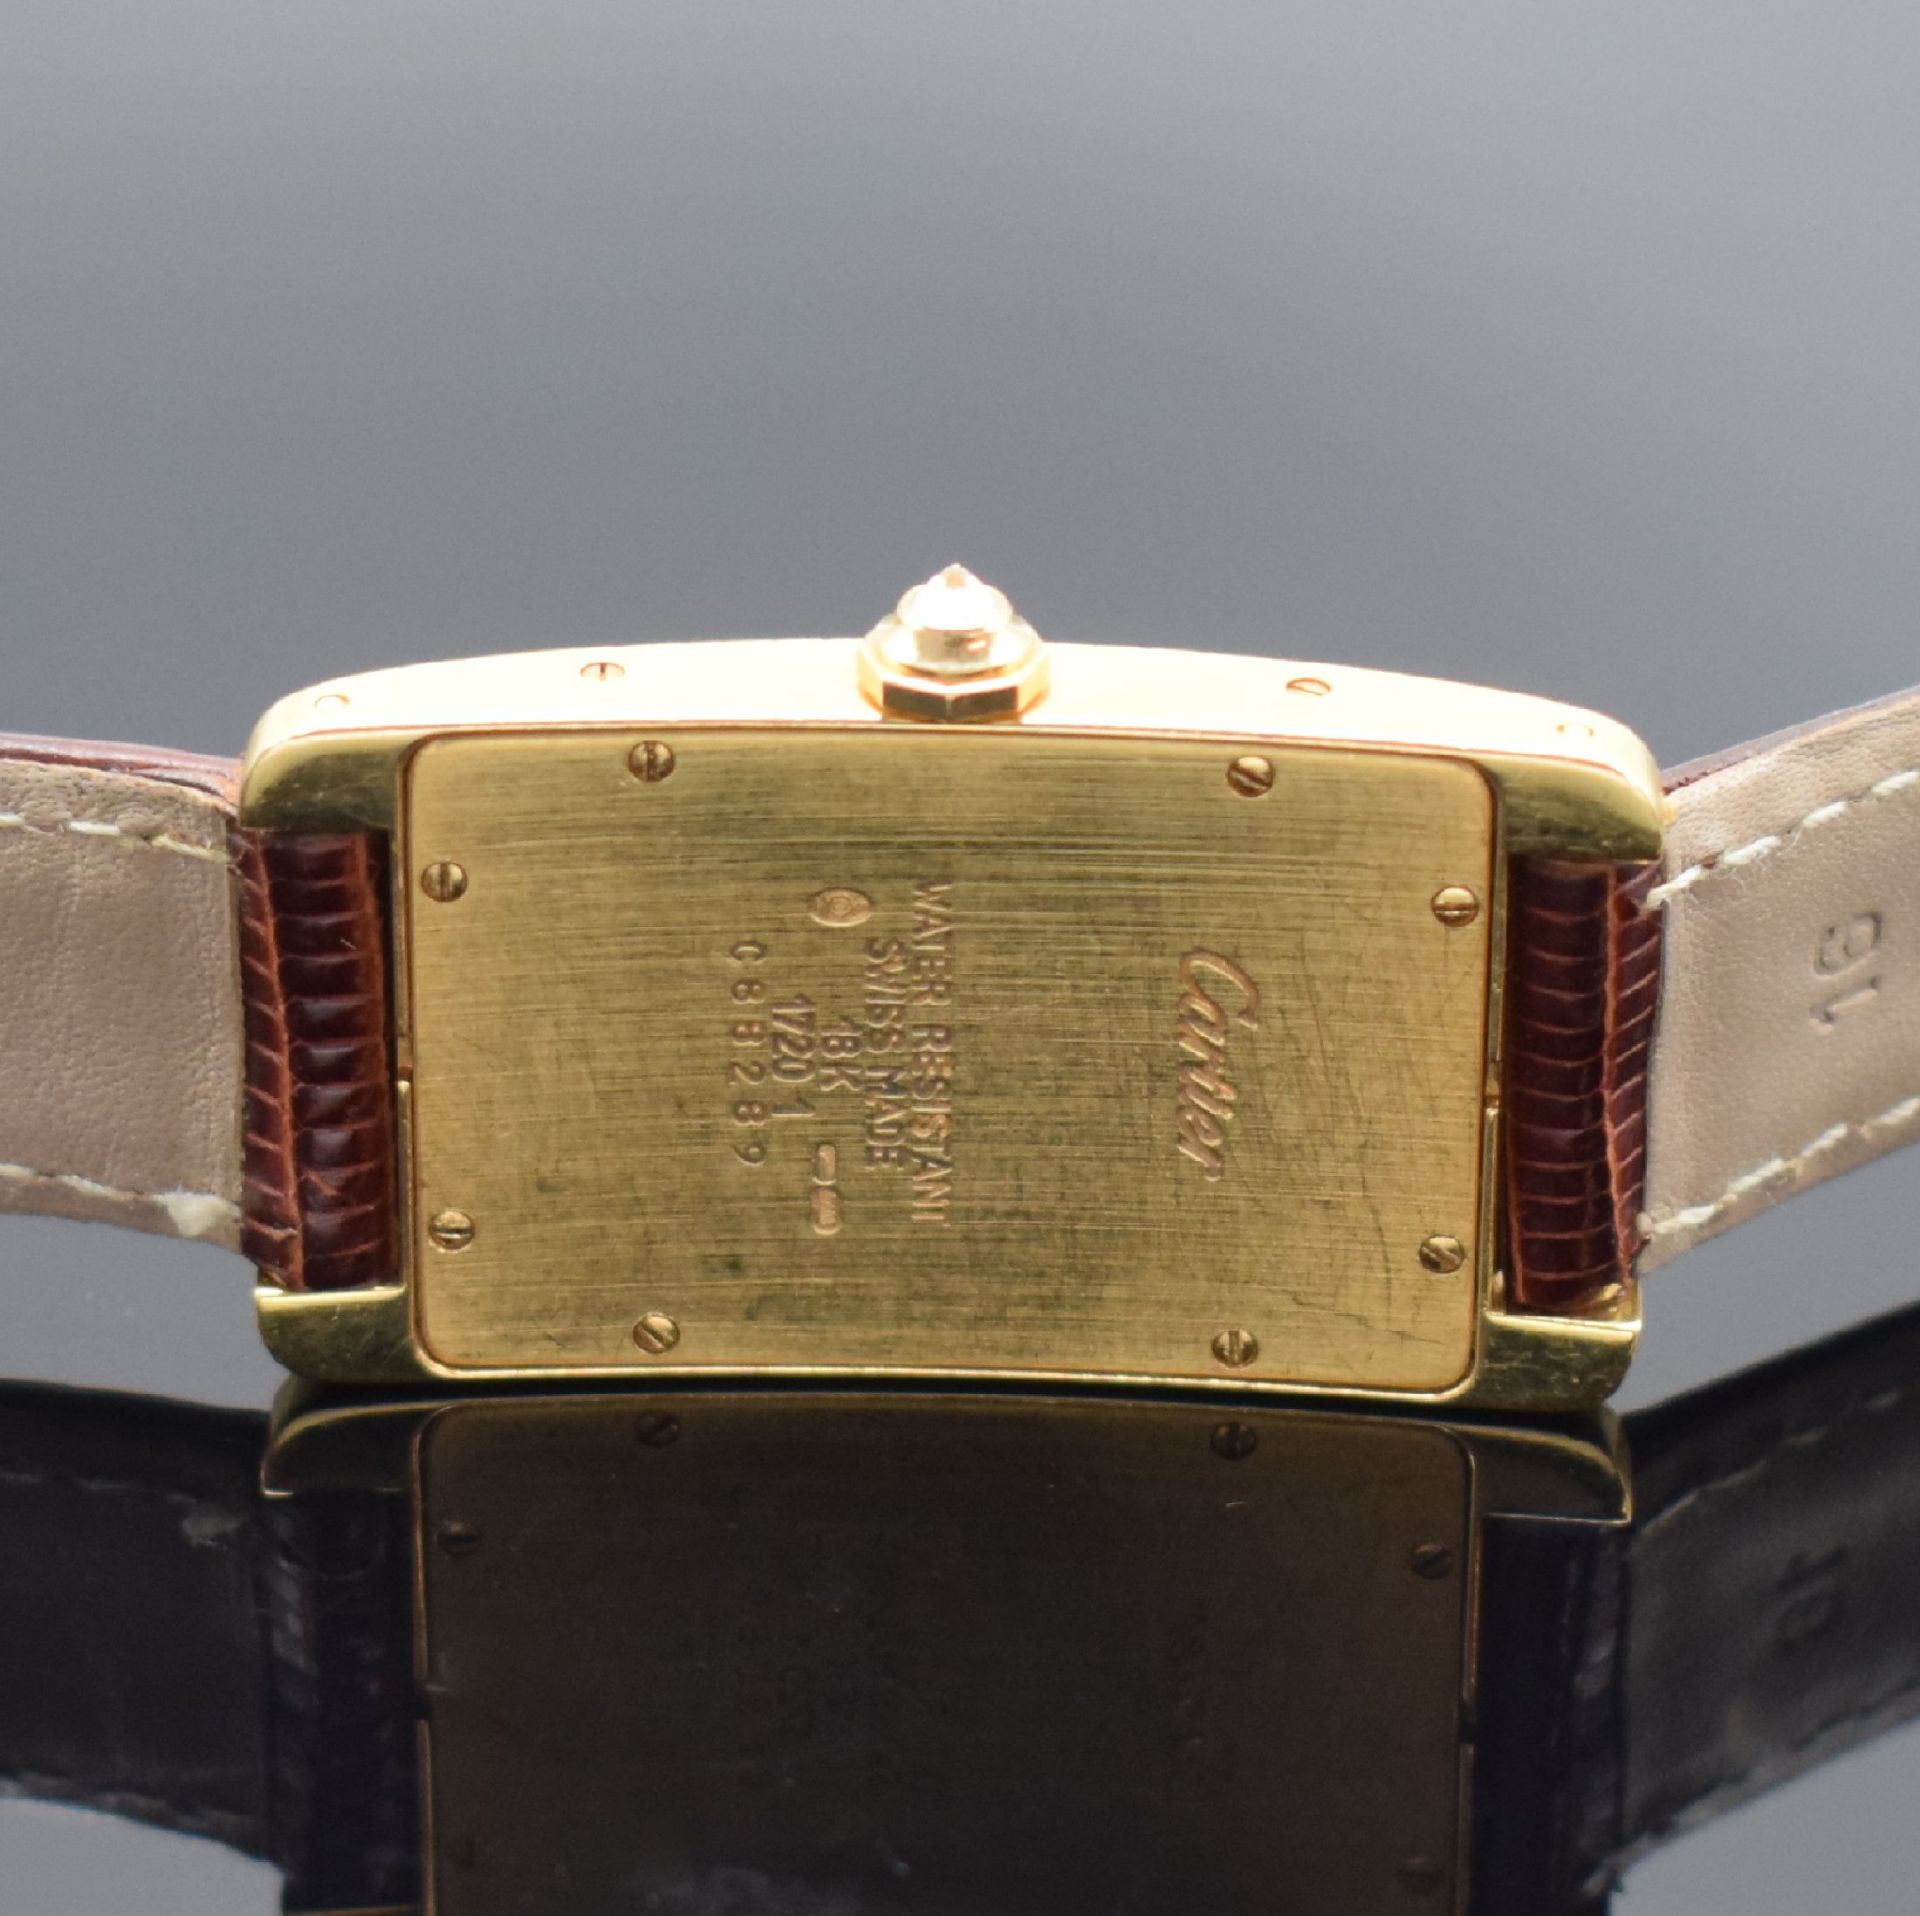 CARTIER Tank Americaine Armbanduhr in GG 750/000 mit - Image 4 of 5